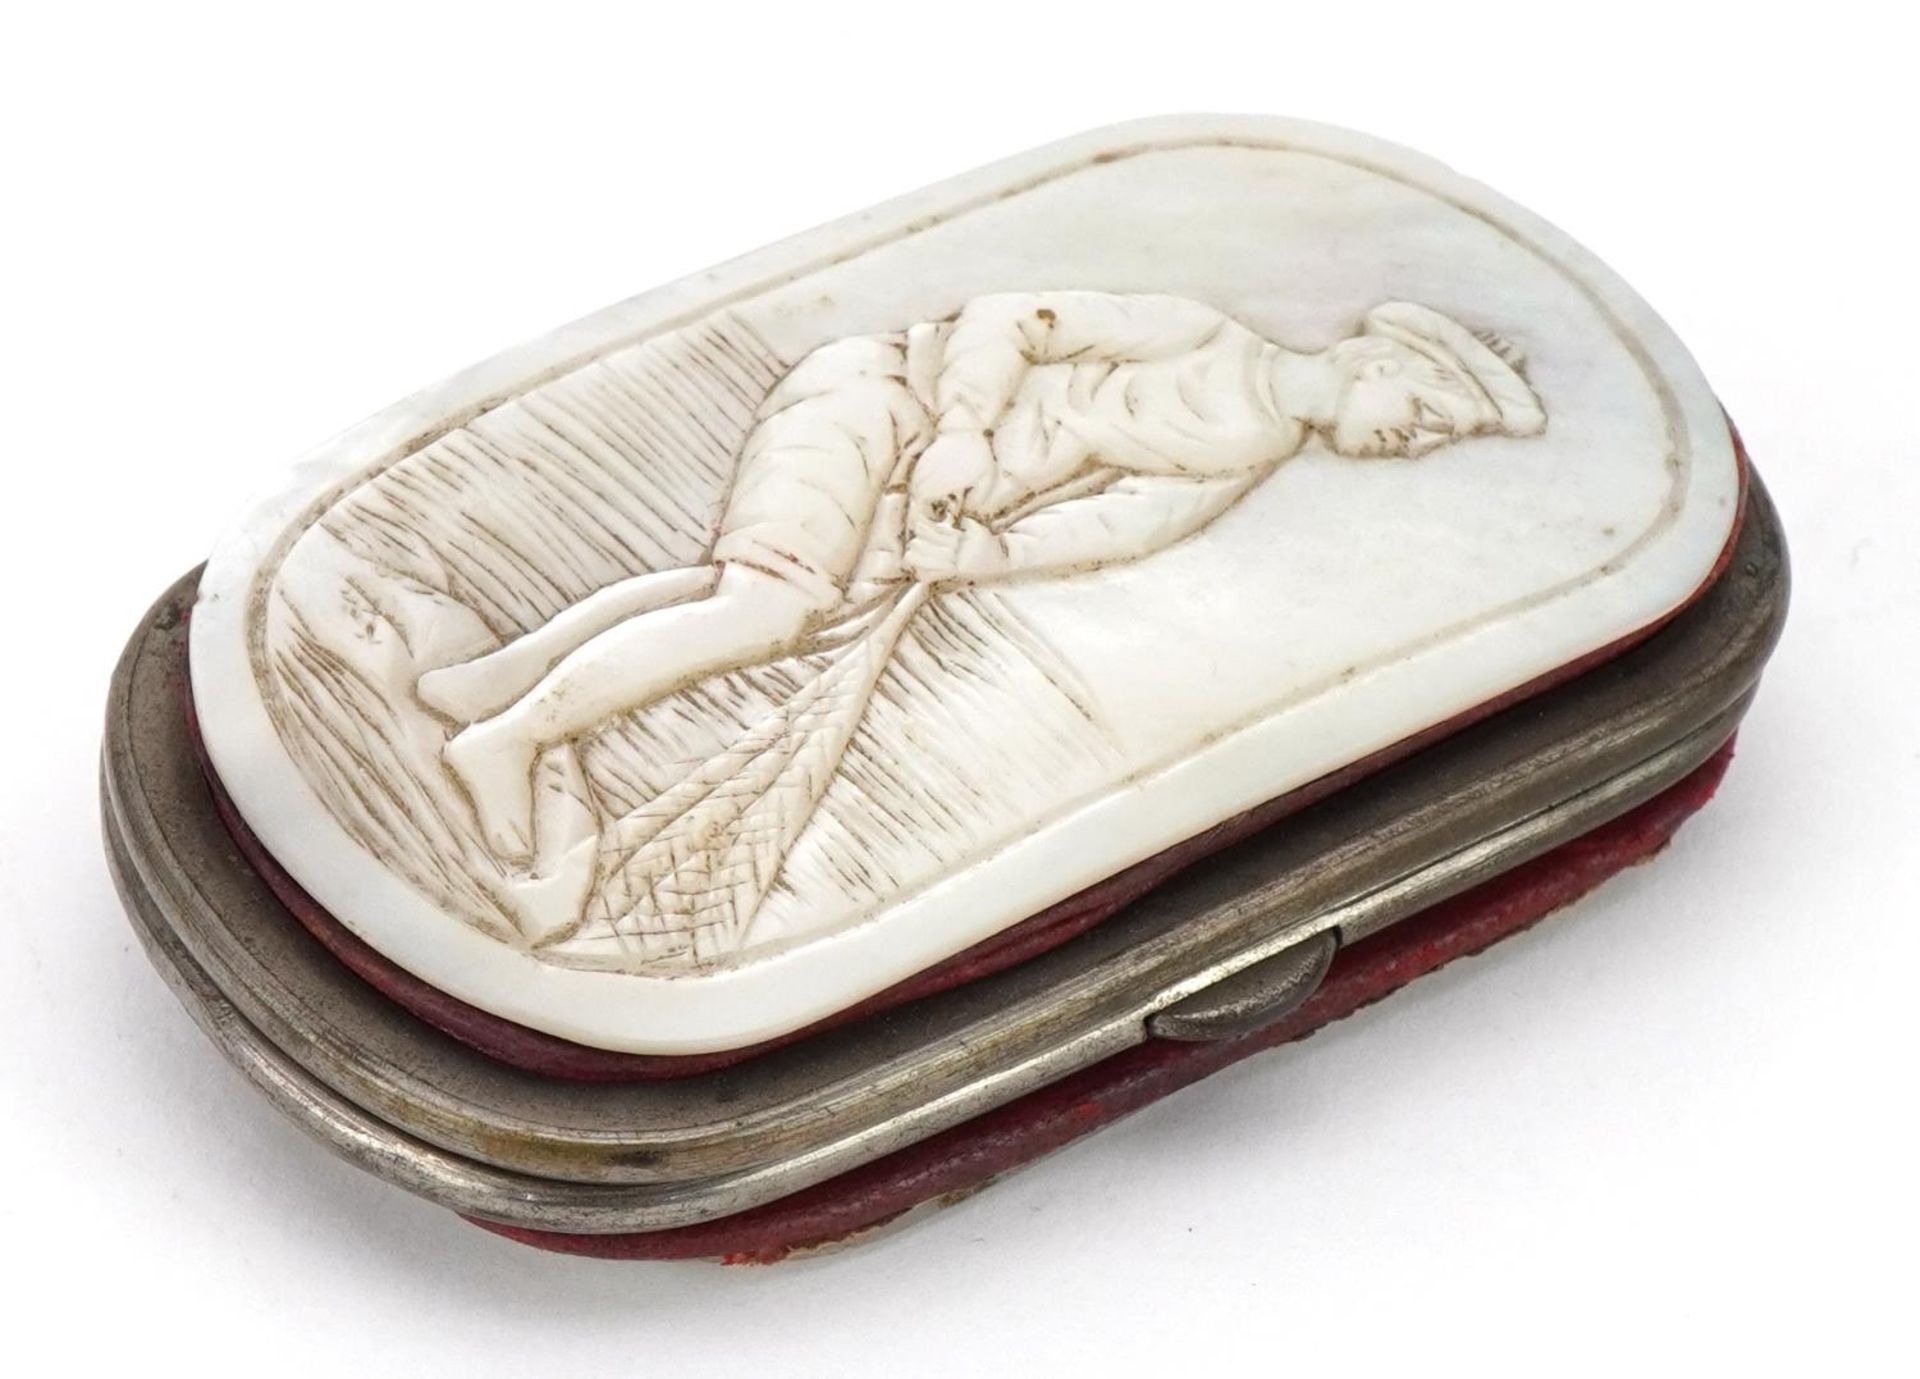 Early 20th century mother of pearl coin purse carved with a fisherman pulling in his catch, 8cm wide